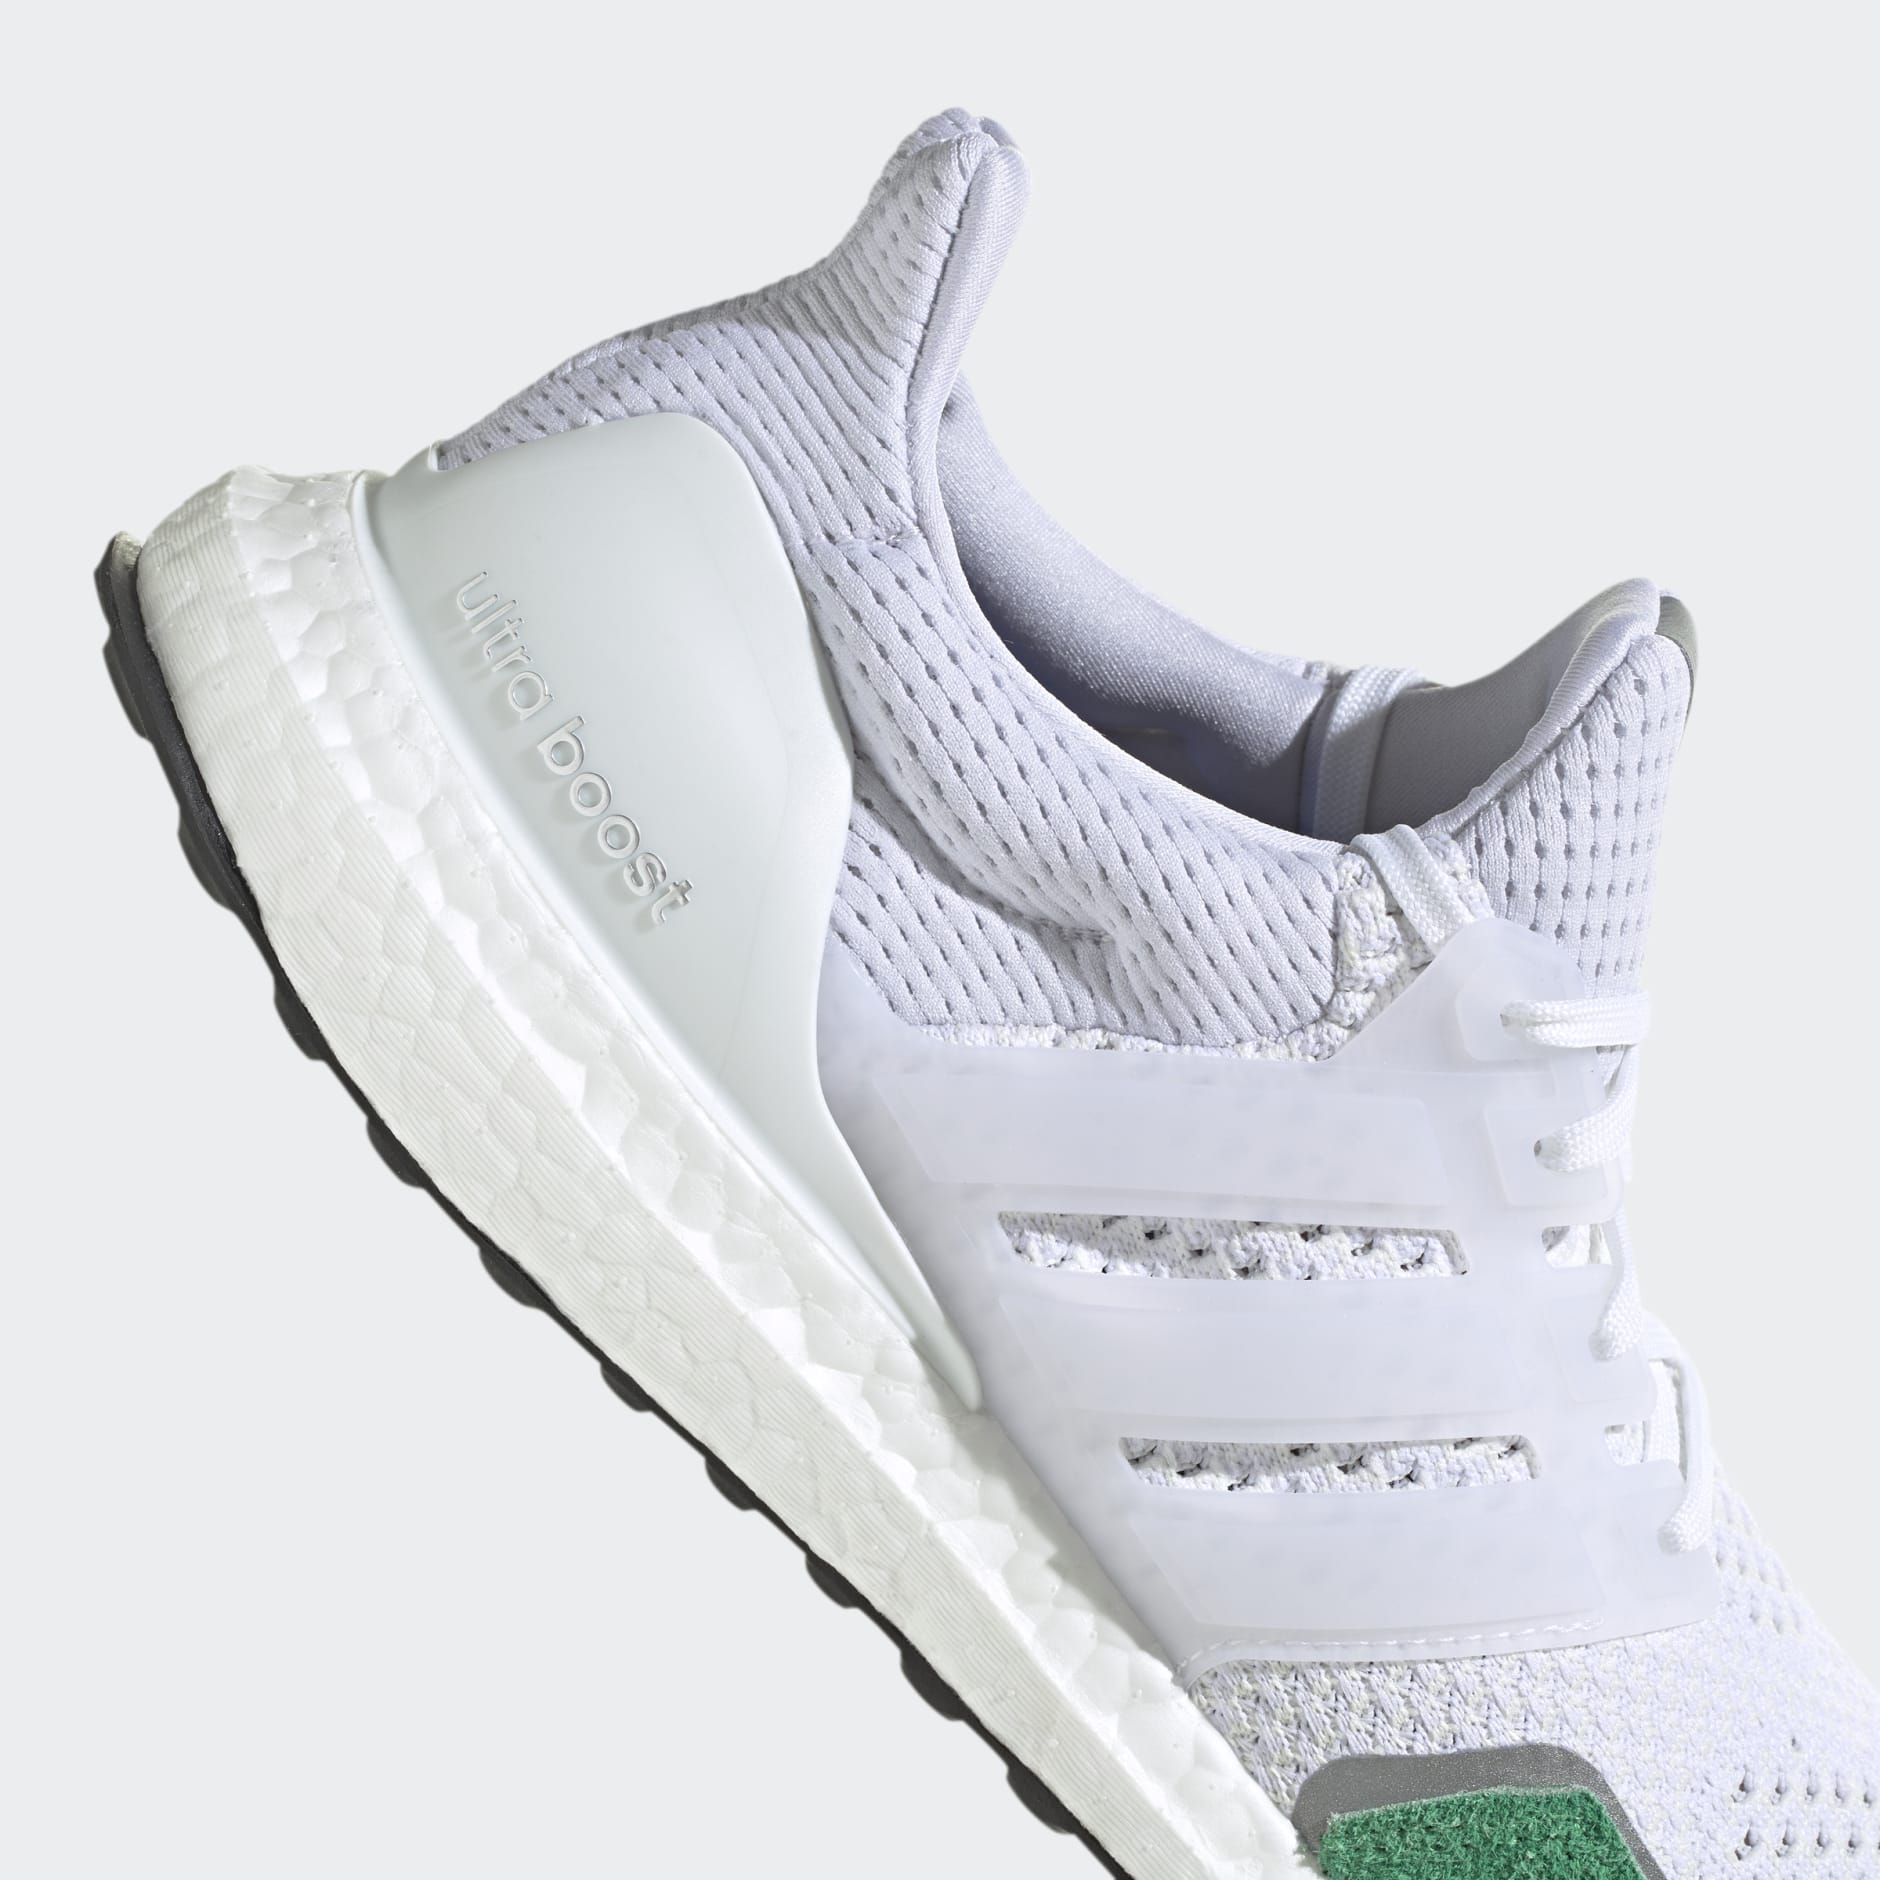 Ultraboost 1 0 Dna Running Shoes - www.inf-inet.com